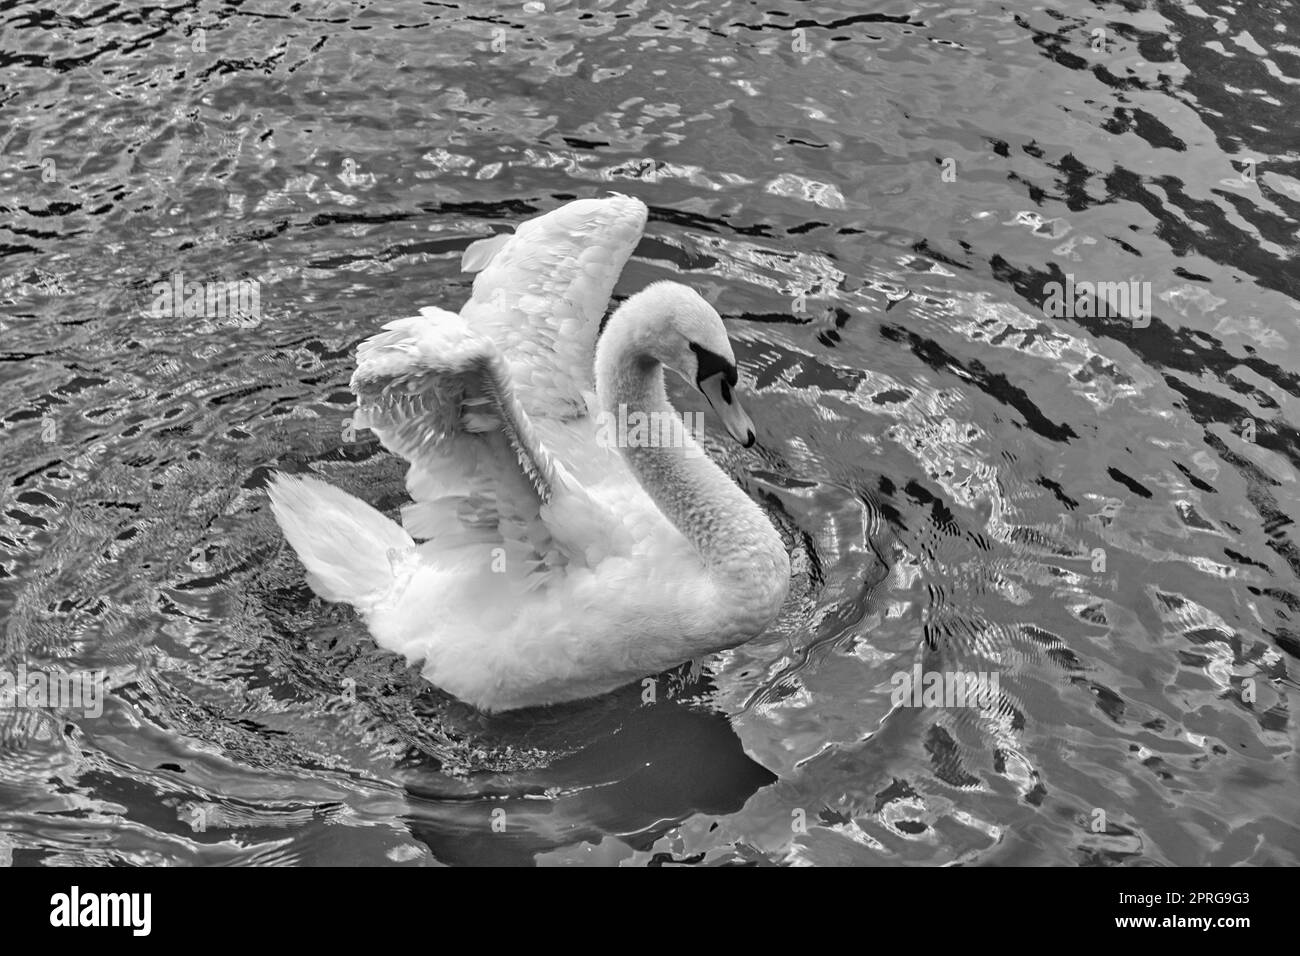 swan in black and white with outstretched wings. eye-catcher with the size of the water bird. Stock Photo